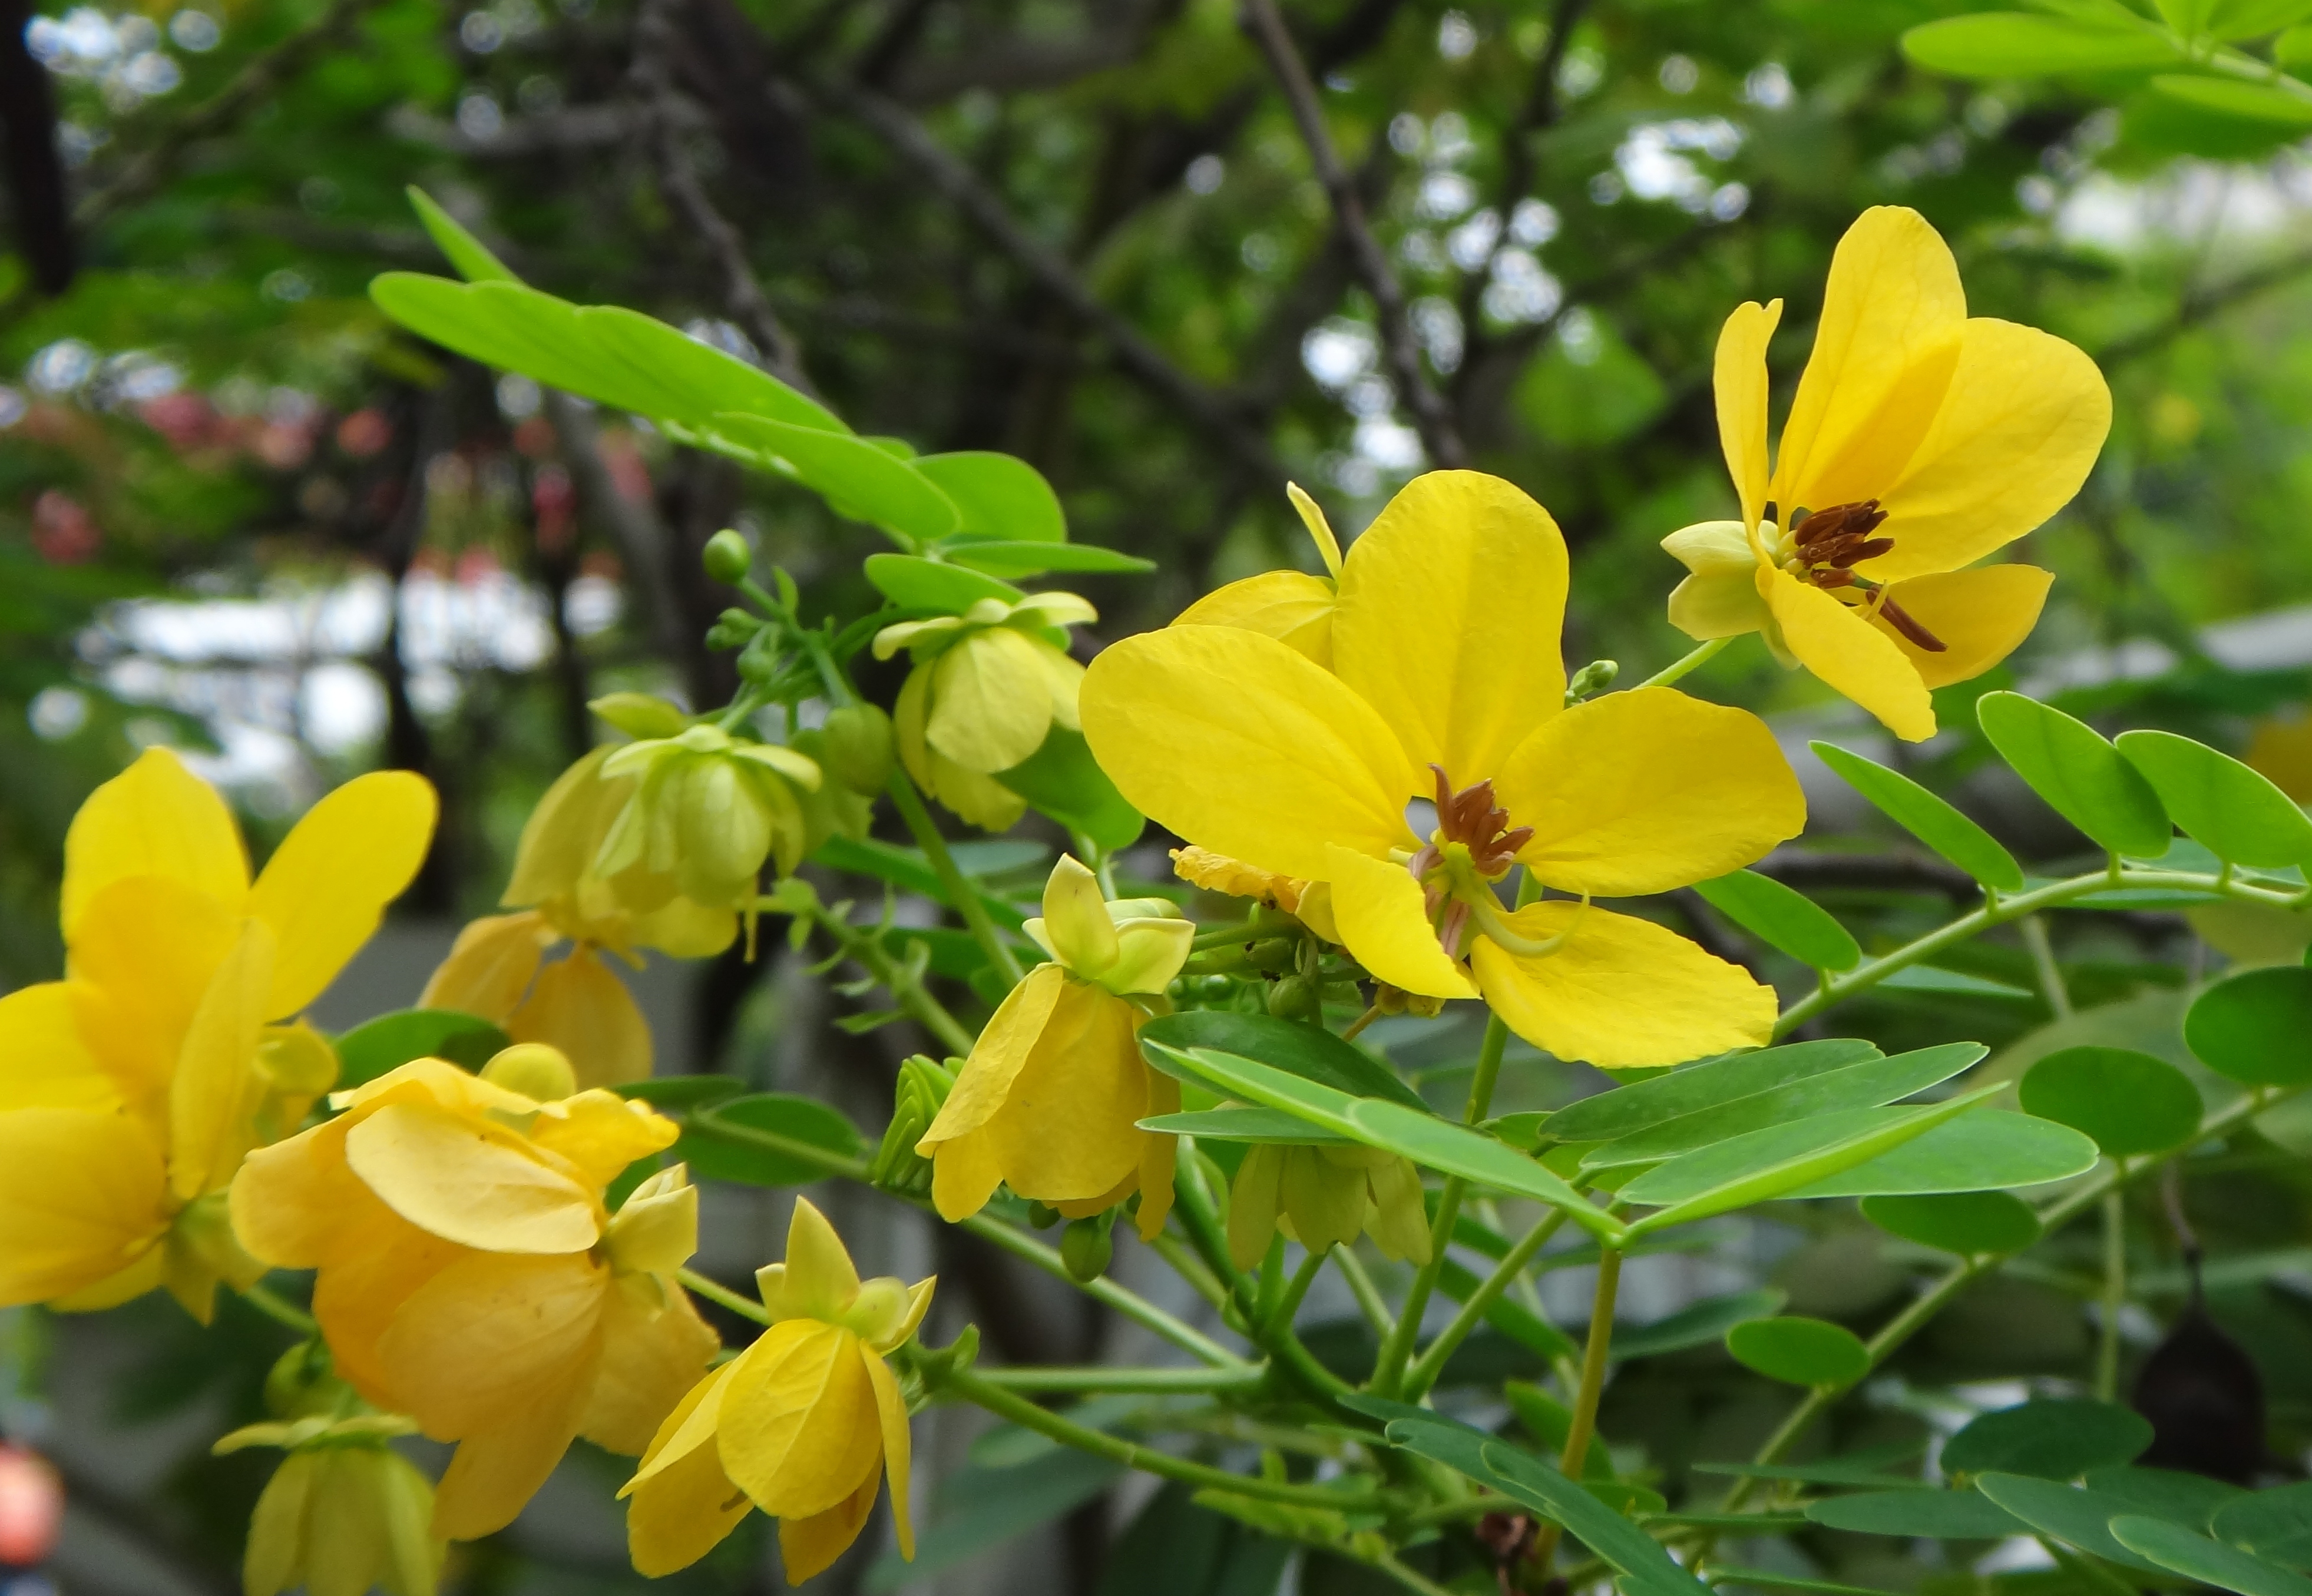 BMV Fragrances offers best quality cassia gum including reconstitution of cassia, Senna Obtusifolia, Cassia Fistula and is used in reforestation projects and species from desert climates can be used to prevent desertification.